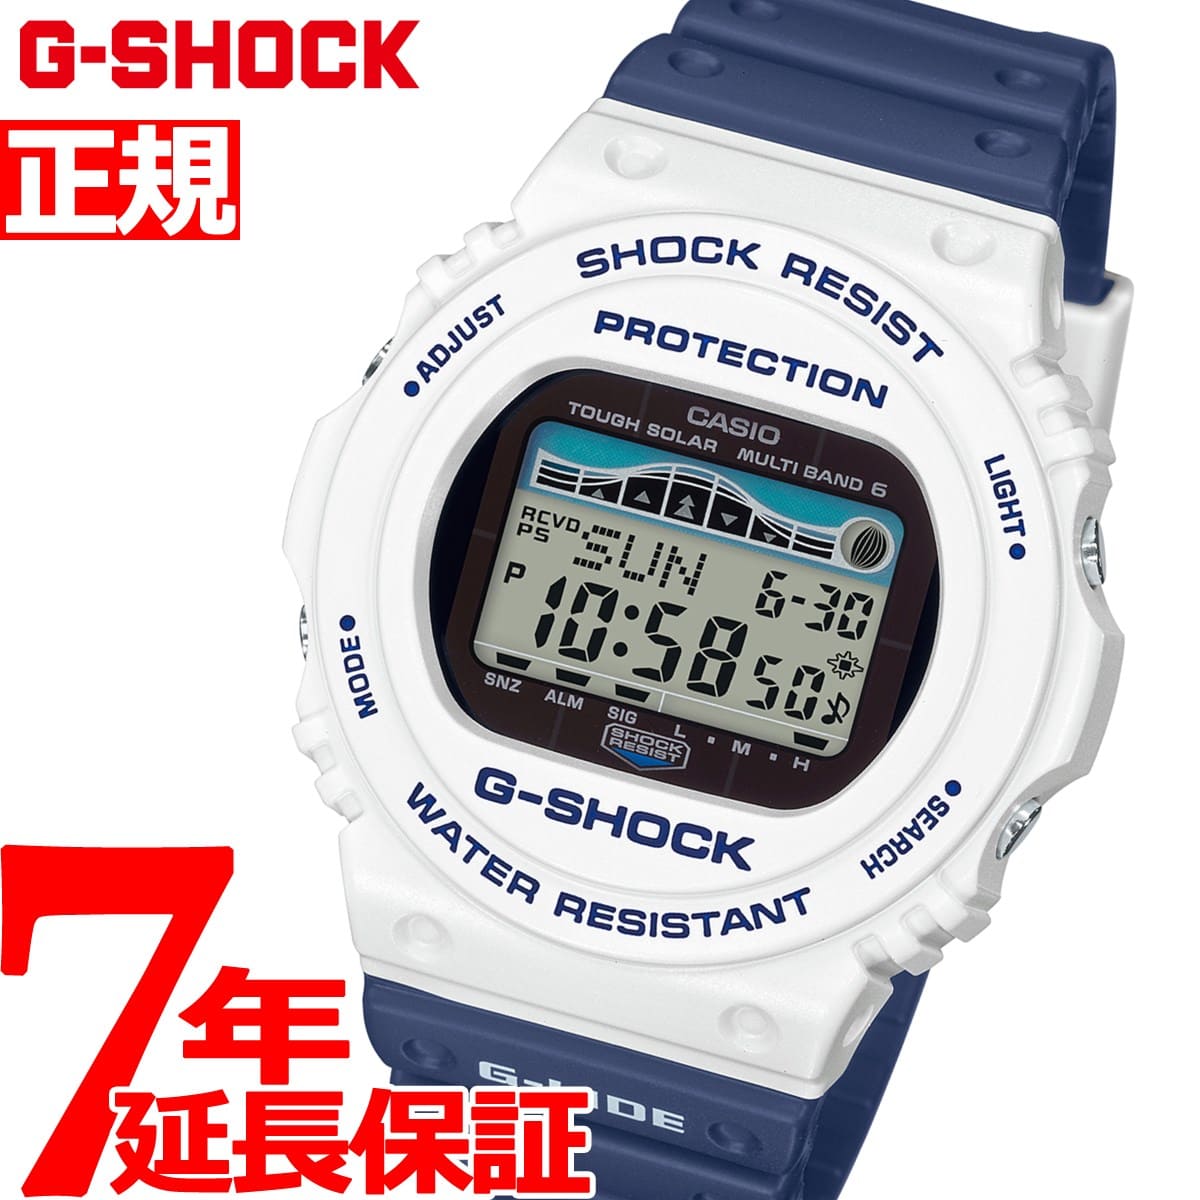 New G Shock Electric Wave Solar Radio Time Signal Casio G Shock G Lide Watch Men Casio Gwx 5700ss 7jf 19 New Works Be Forward Store